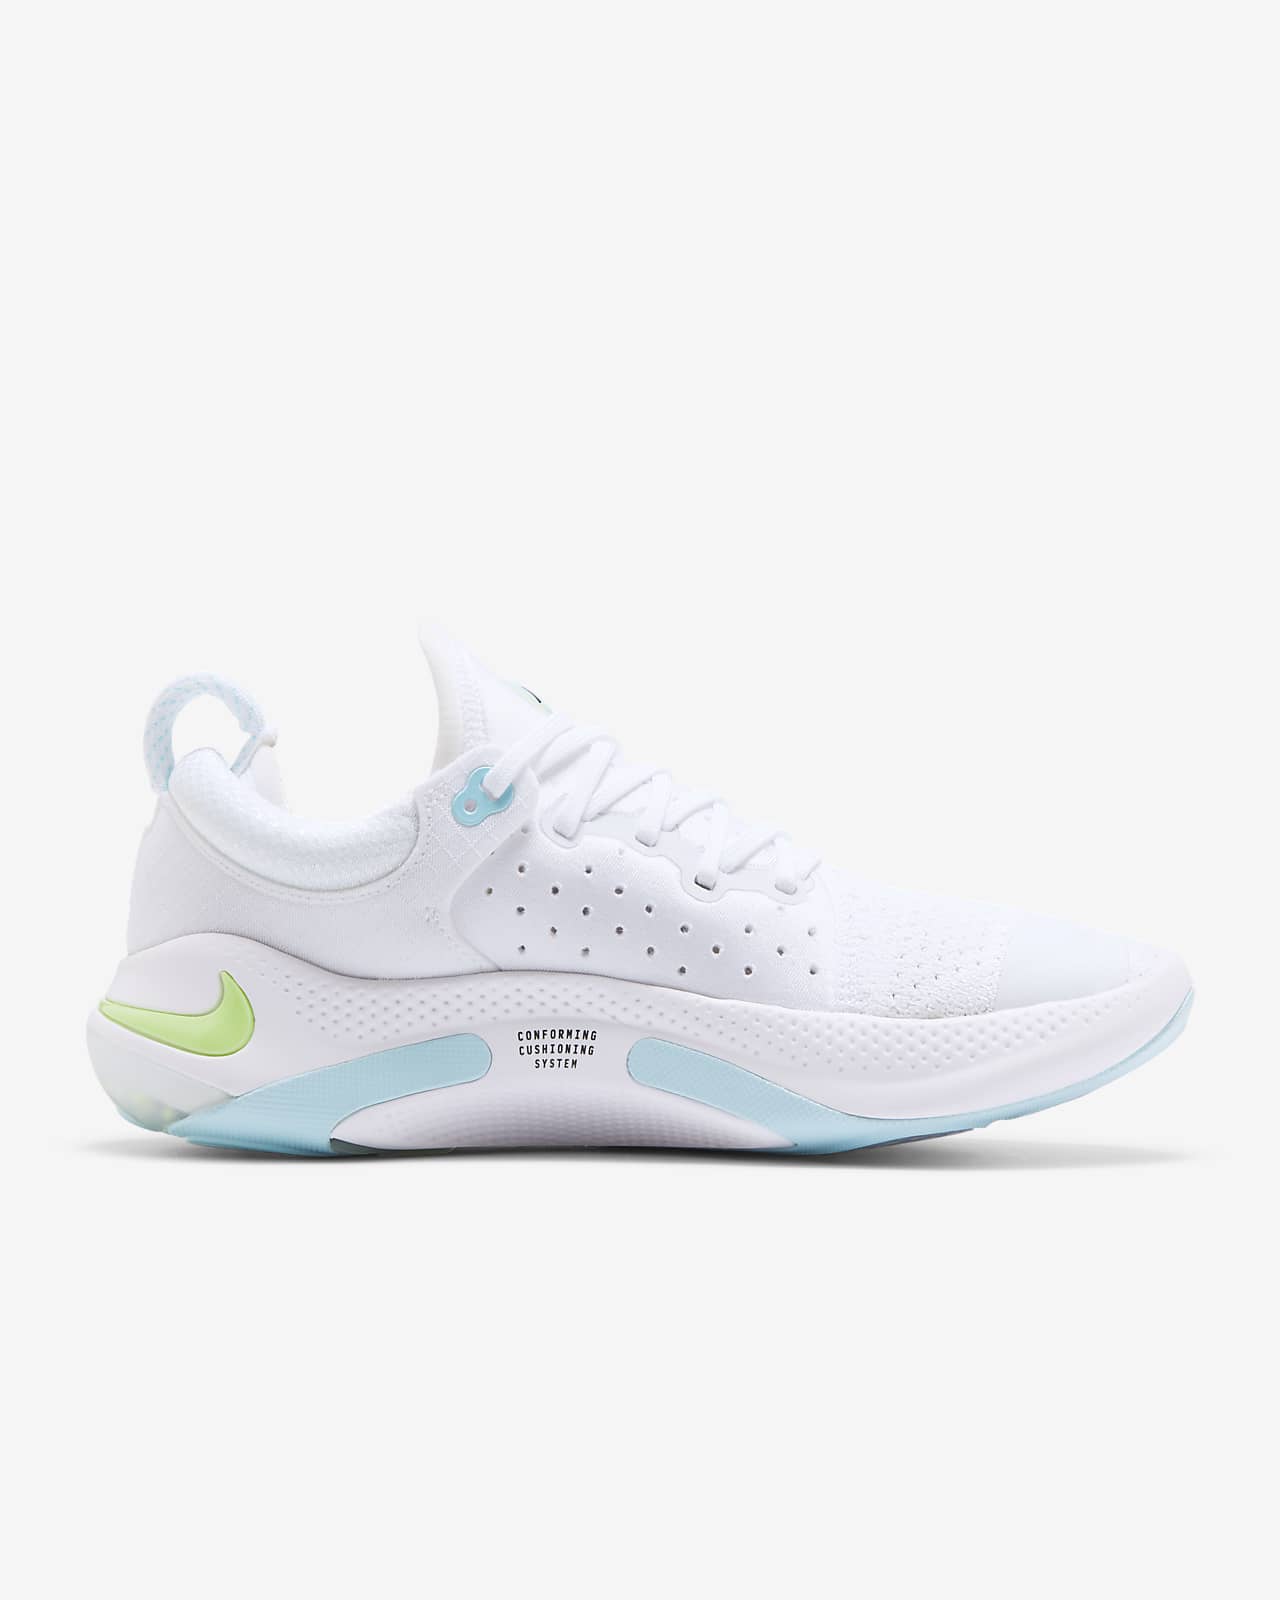 nike joyride shoes price in india